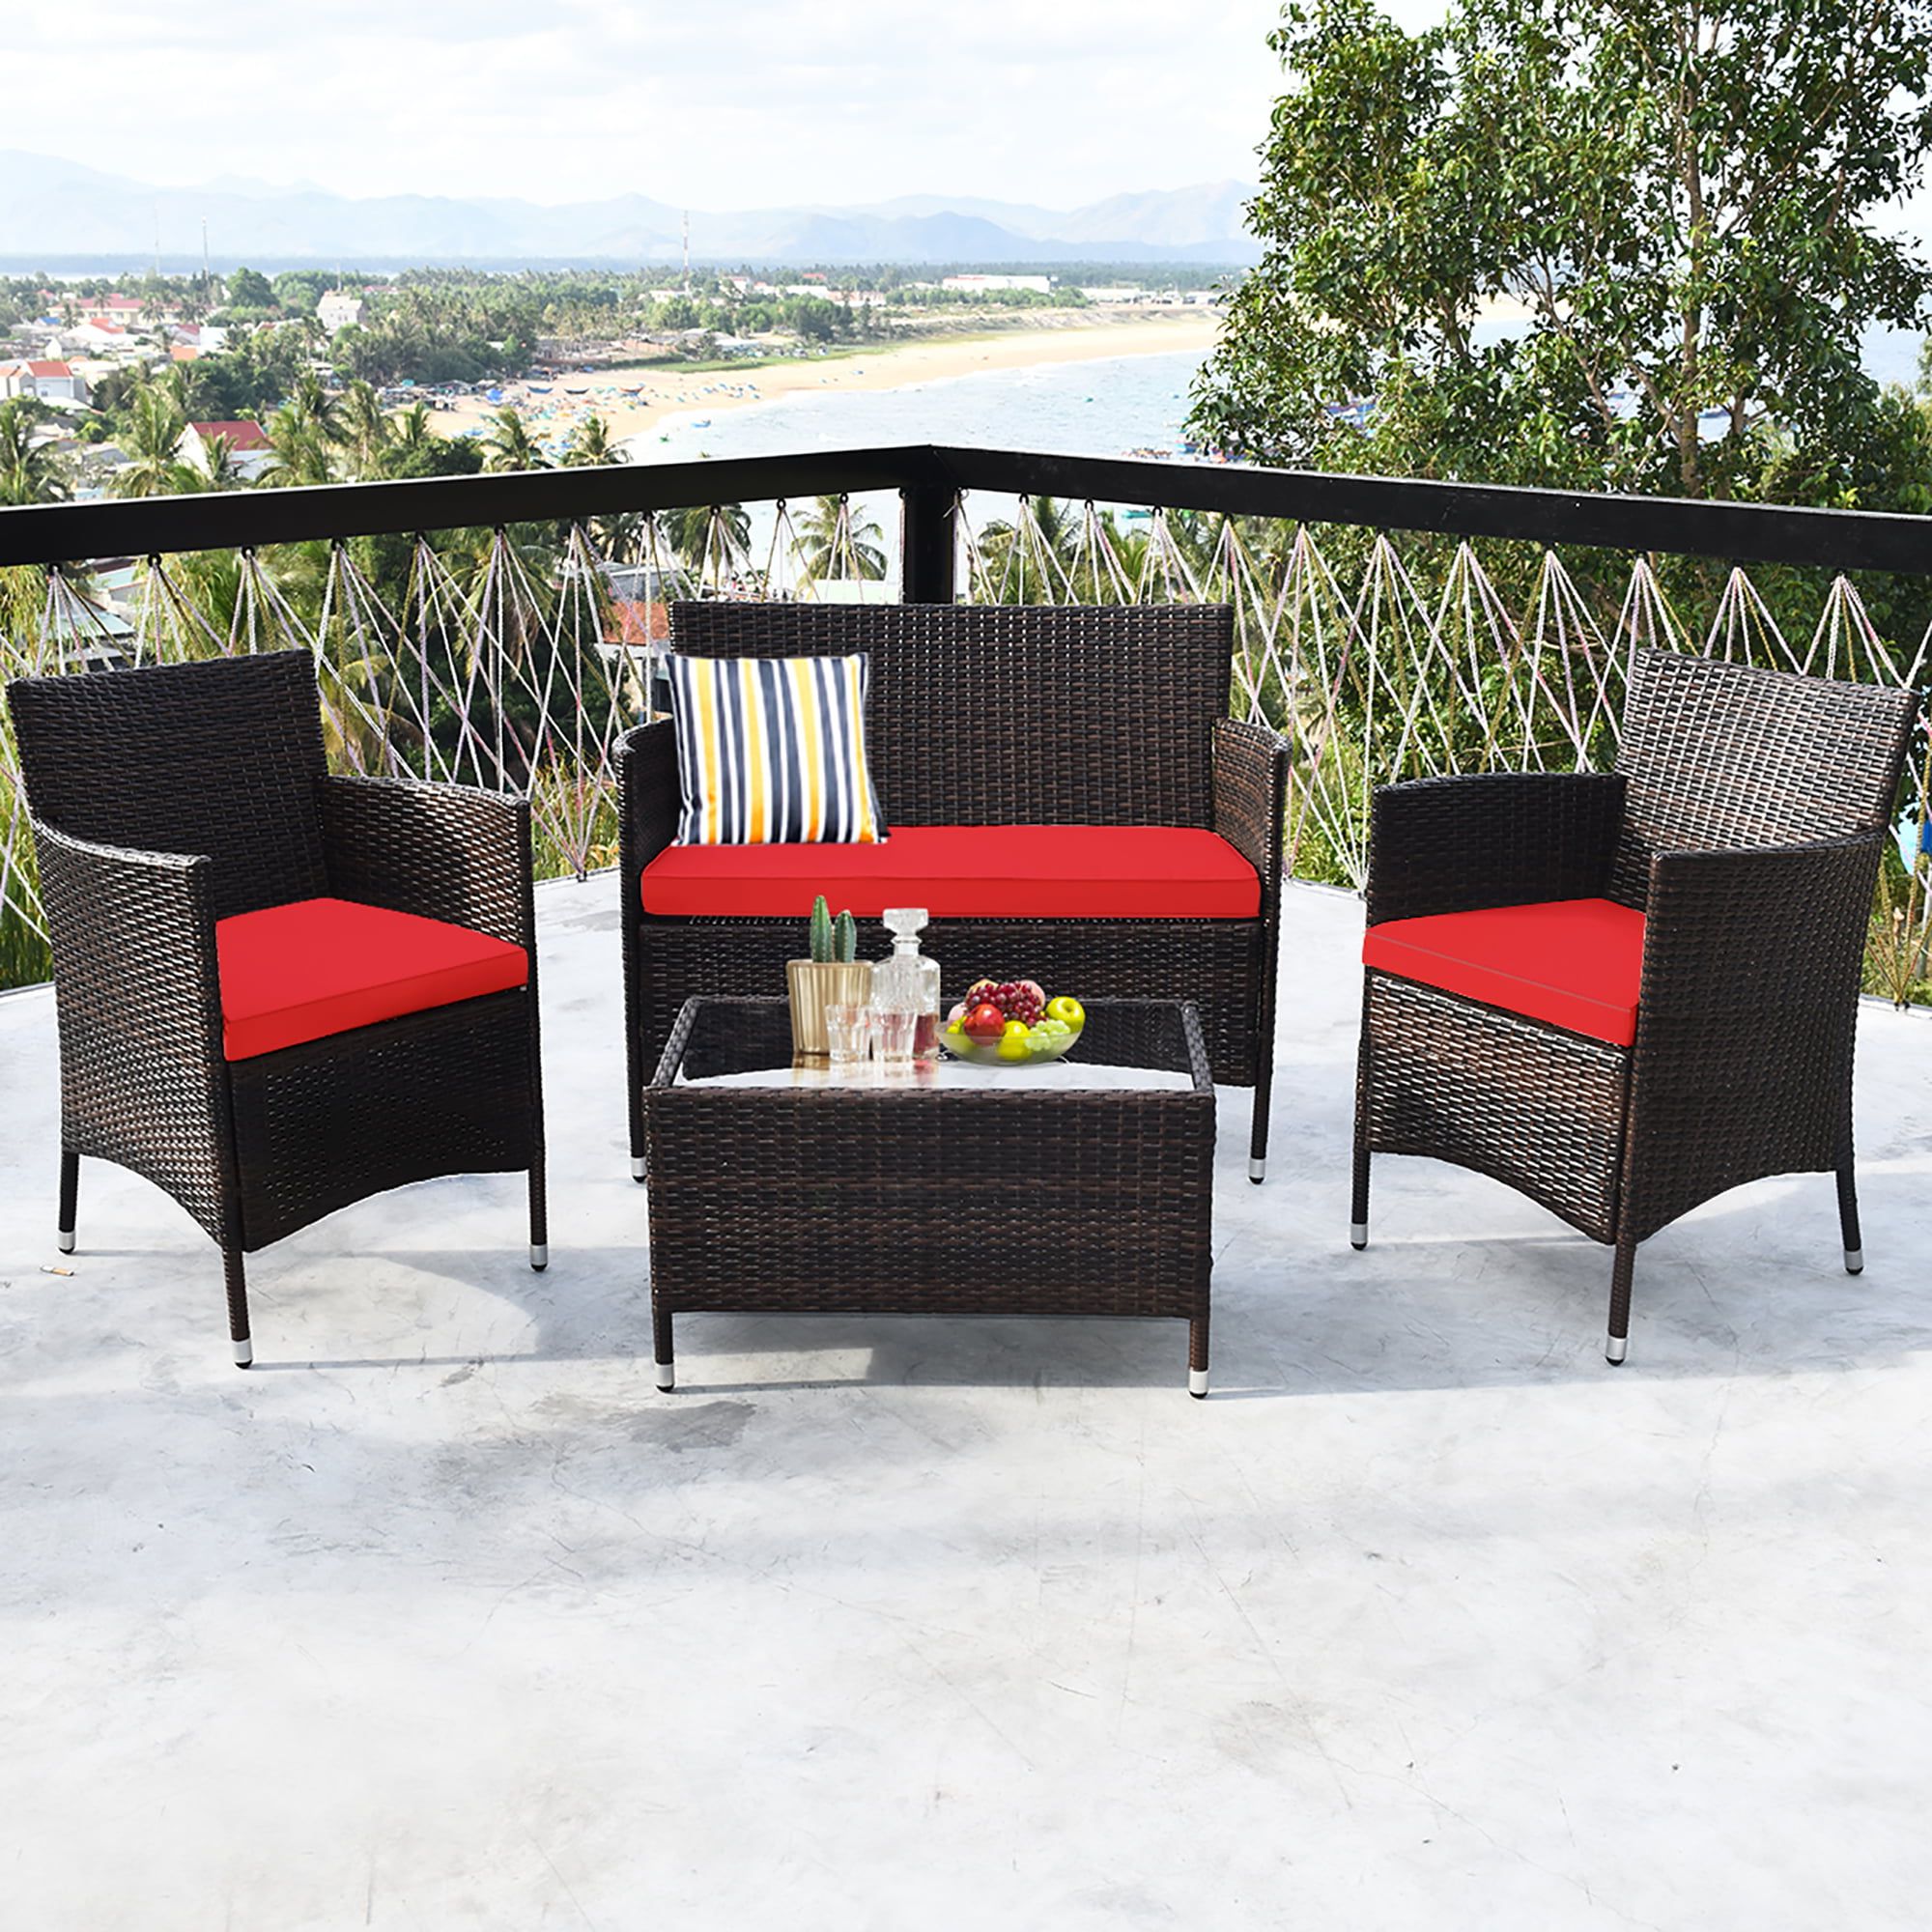 4pcs Rattan Patio Coffee Tables With Regard To Best And Newest Costway 4pcs Rattan Patio Furniture Set Cushioned Sofa Chair Coffee (View 2 of 15)